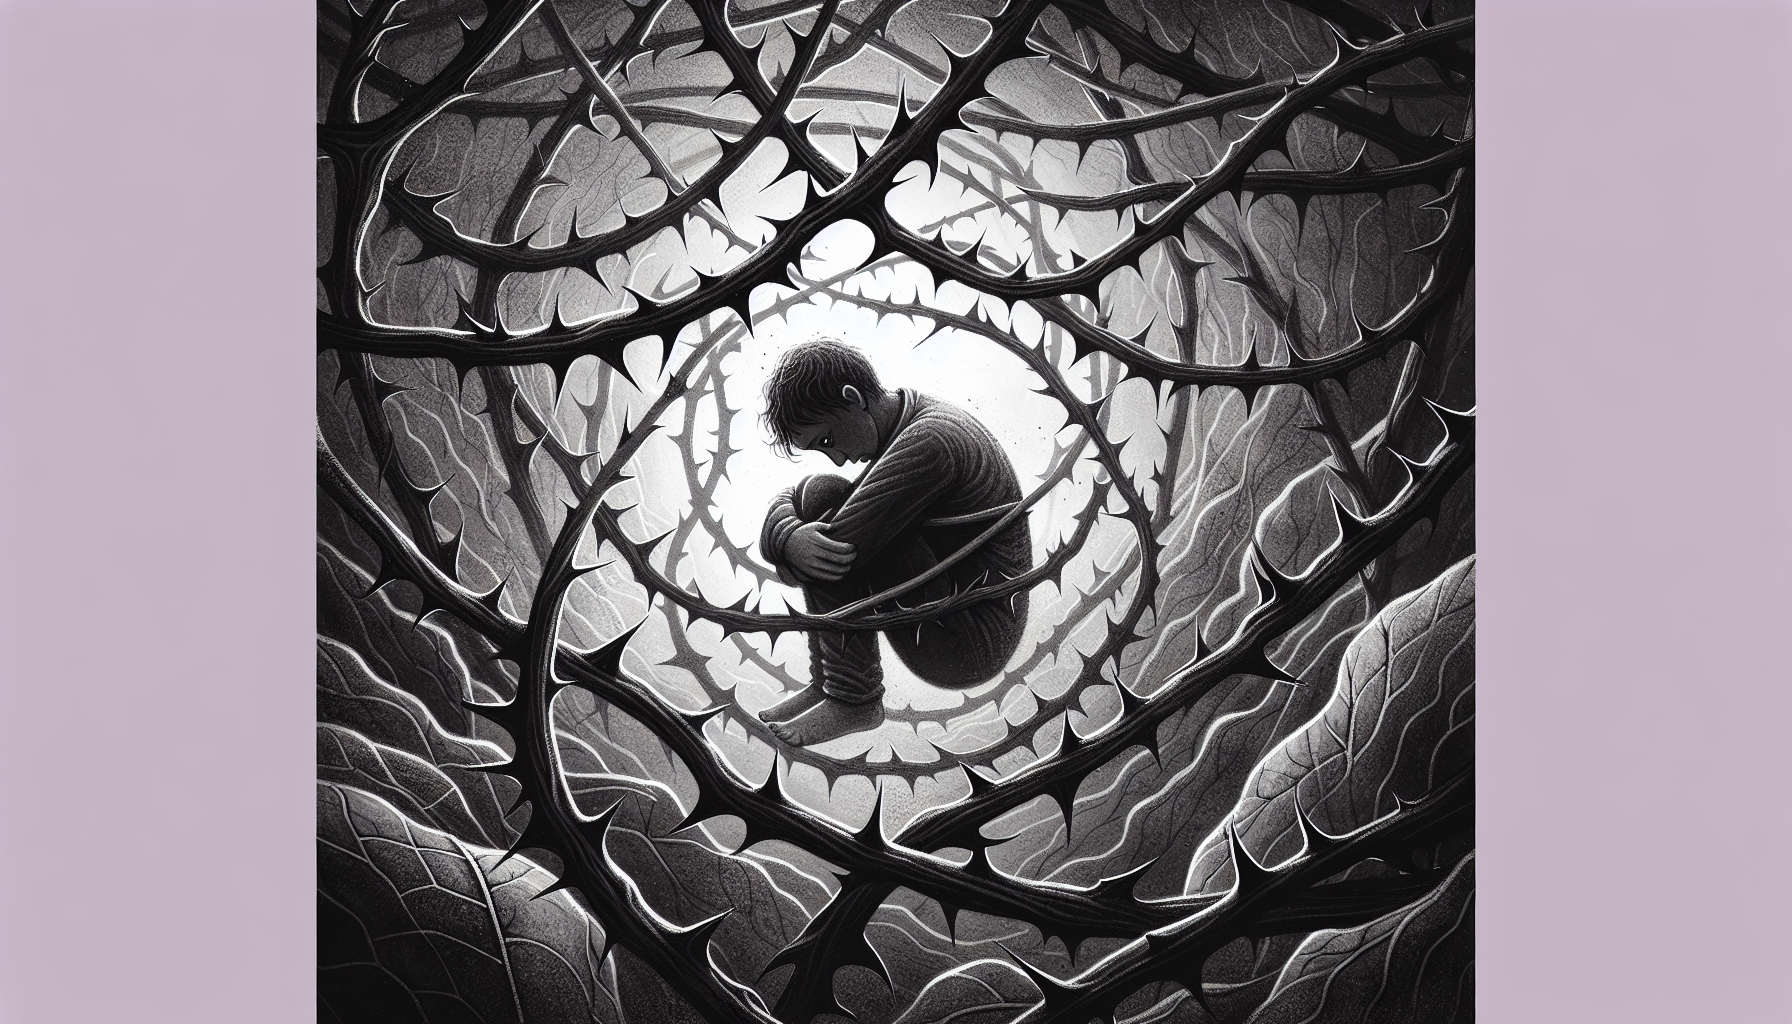 Illustration of a person trapped in a web of blame and self-doubt